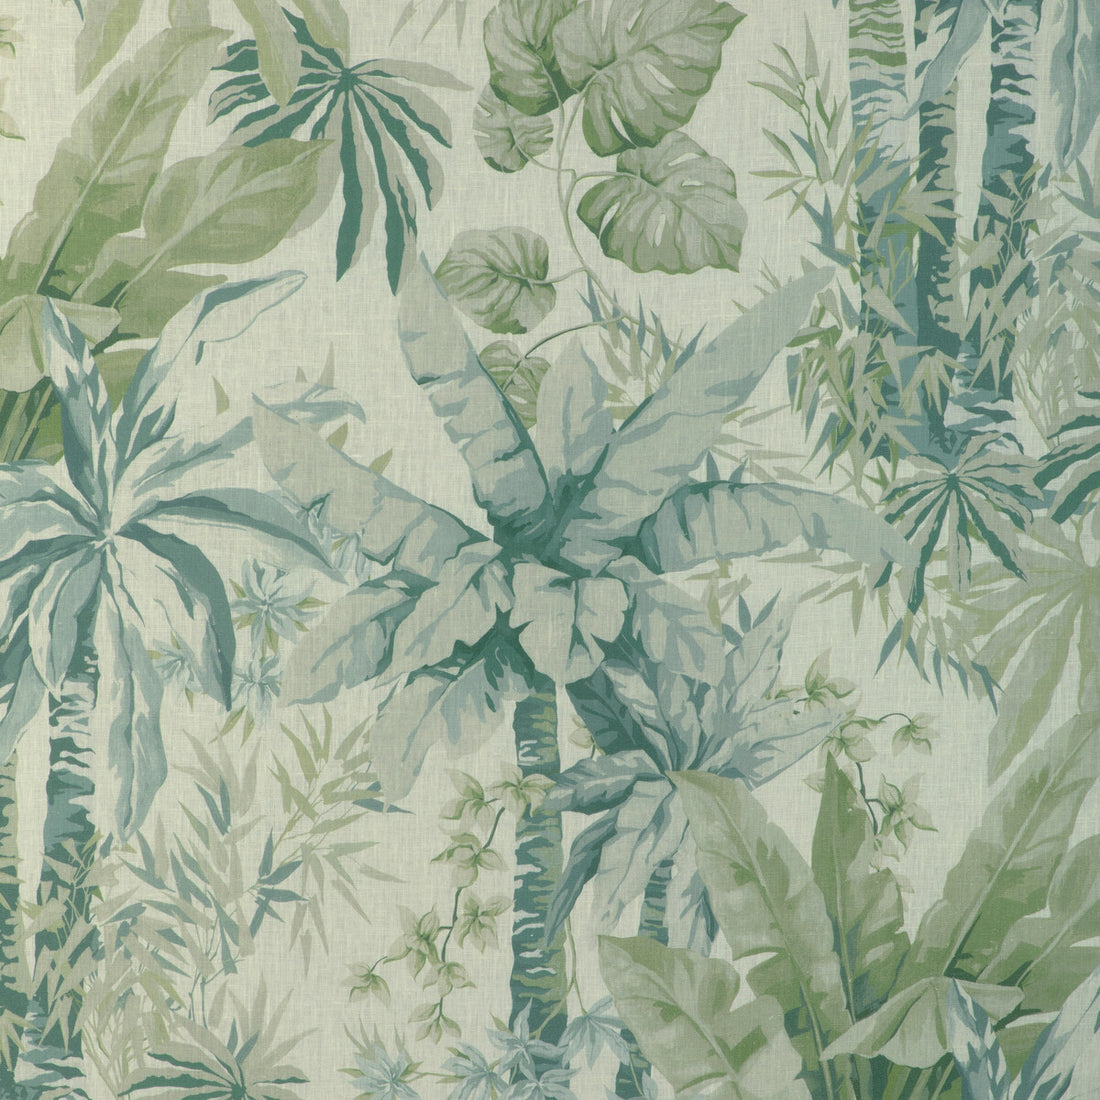 Junglewood fabric in blue sage color - pattern JUNGLEWOOD.35.0 - by Kravet Couture in the Casa Botanica collection